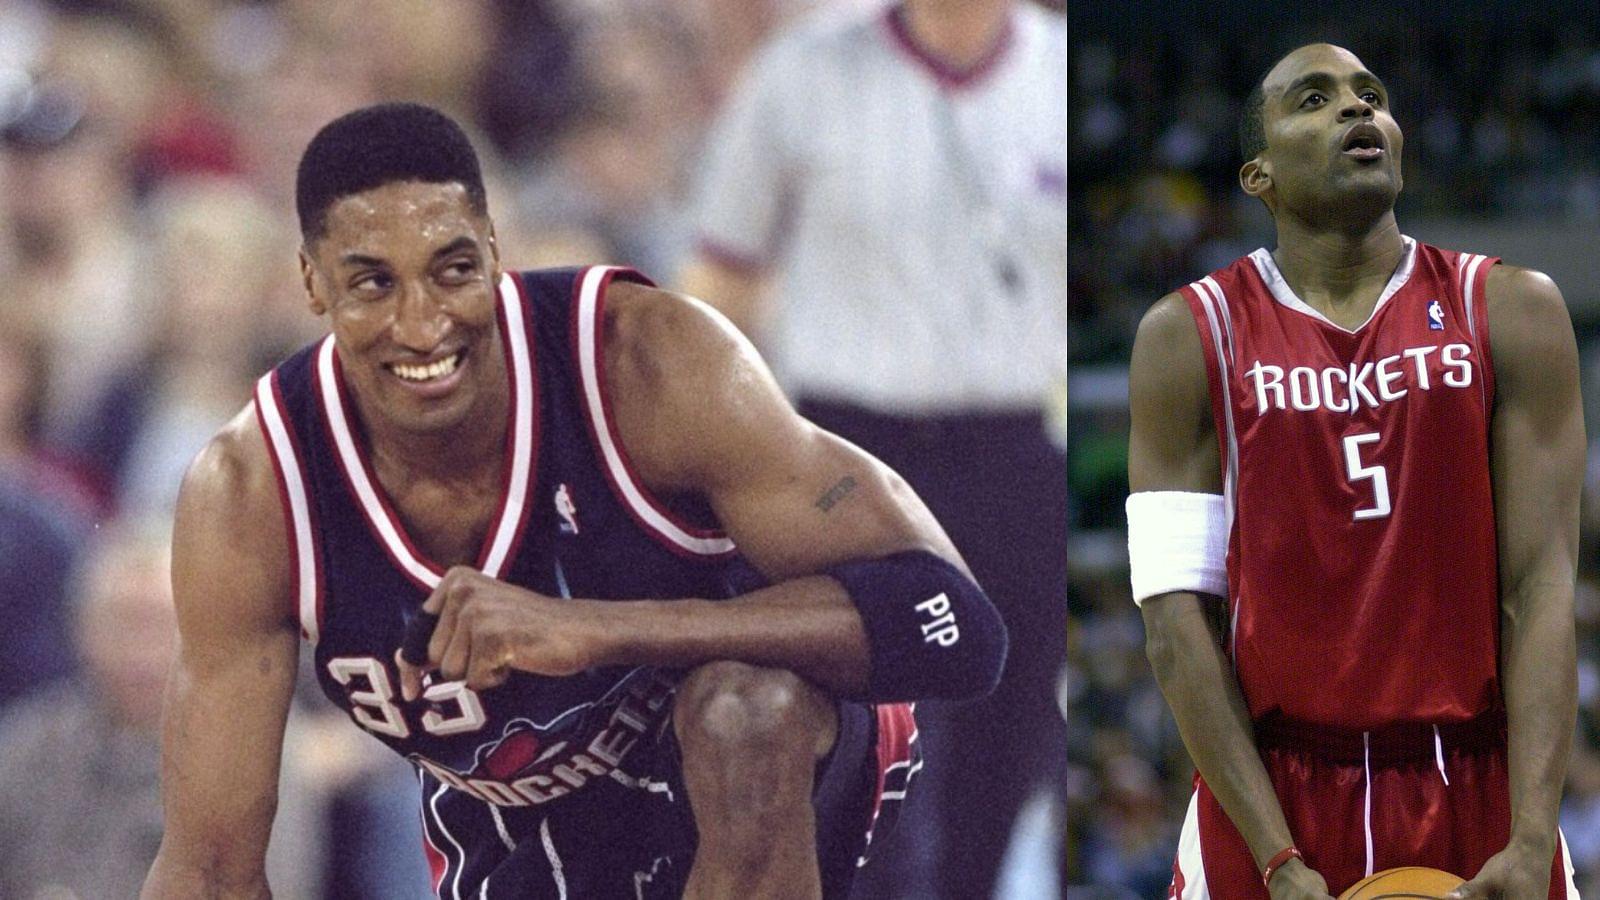 "Scottie Pippen is on Phone? I Almost Pooped my Pants”: Cuttino Mobley Reminisces First Talk With His Idol